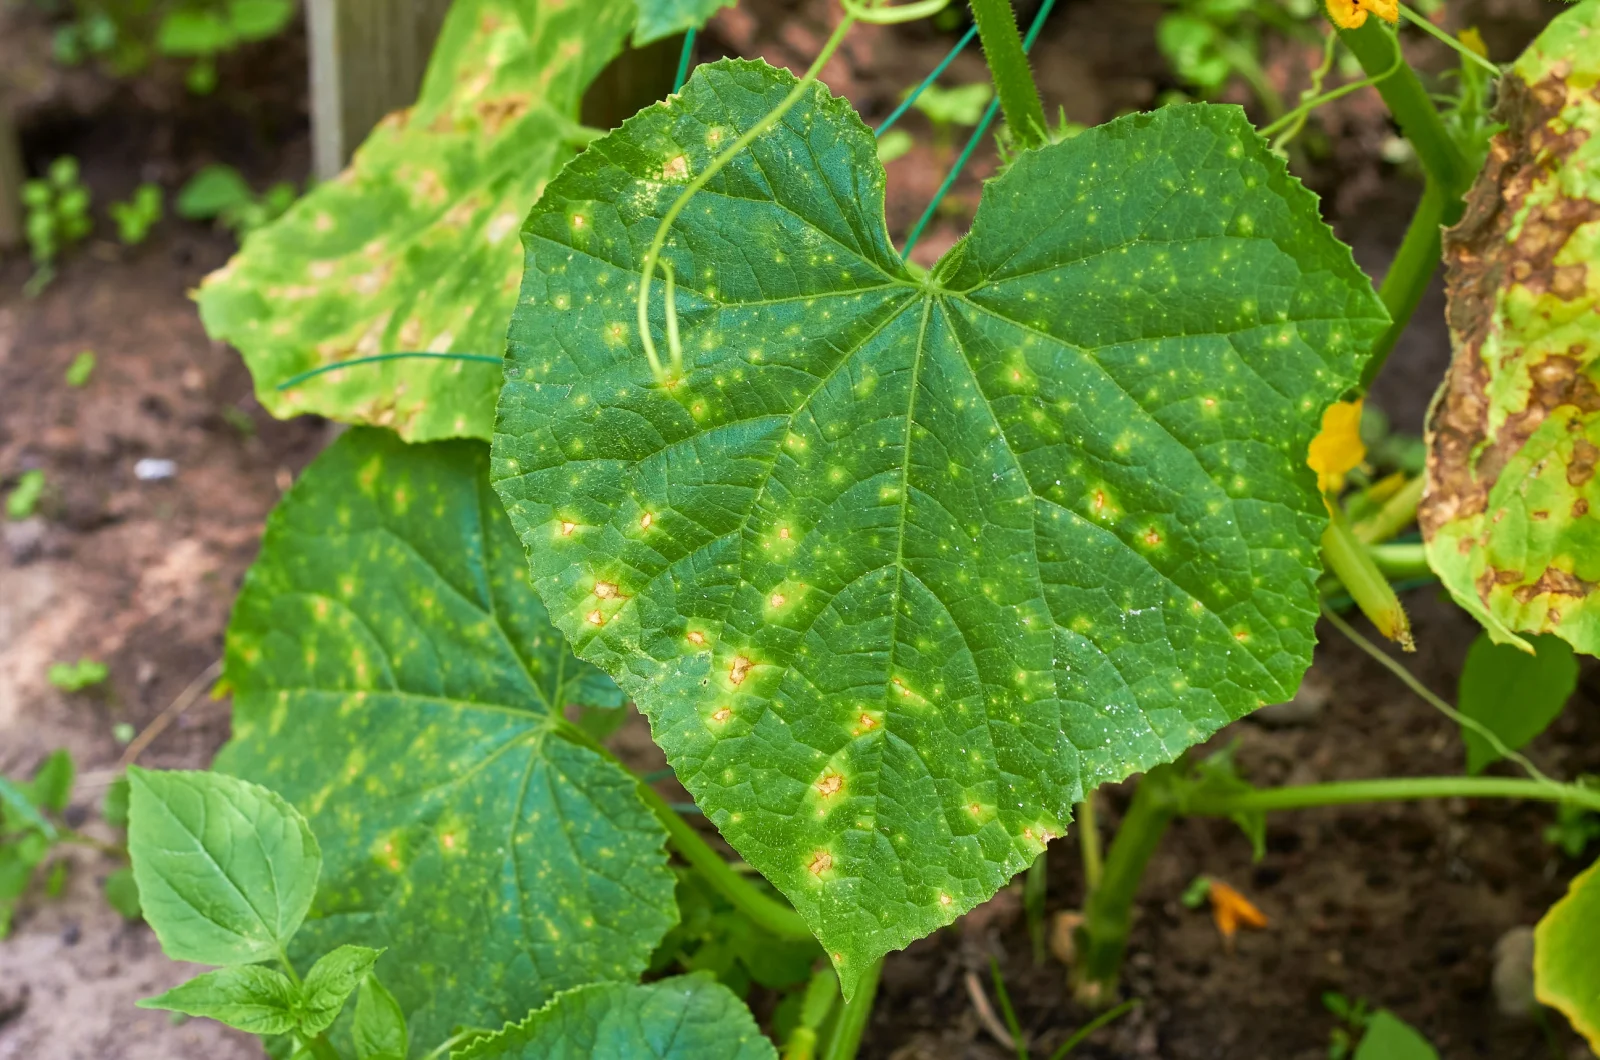 Cucumber leaves affected by downy mildew